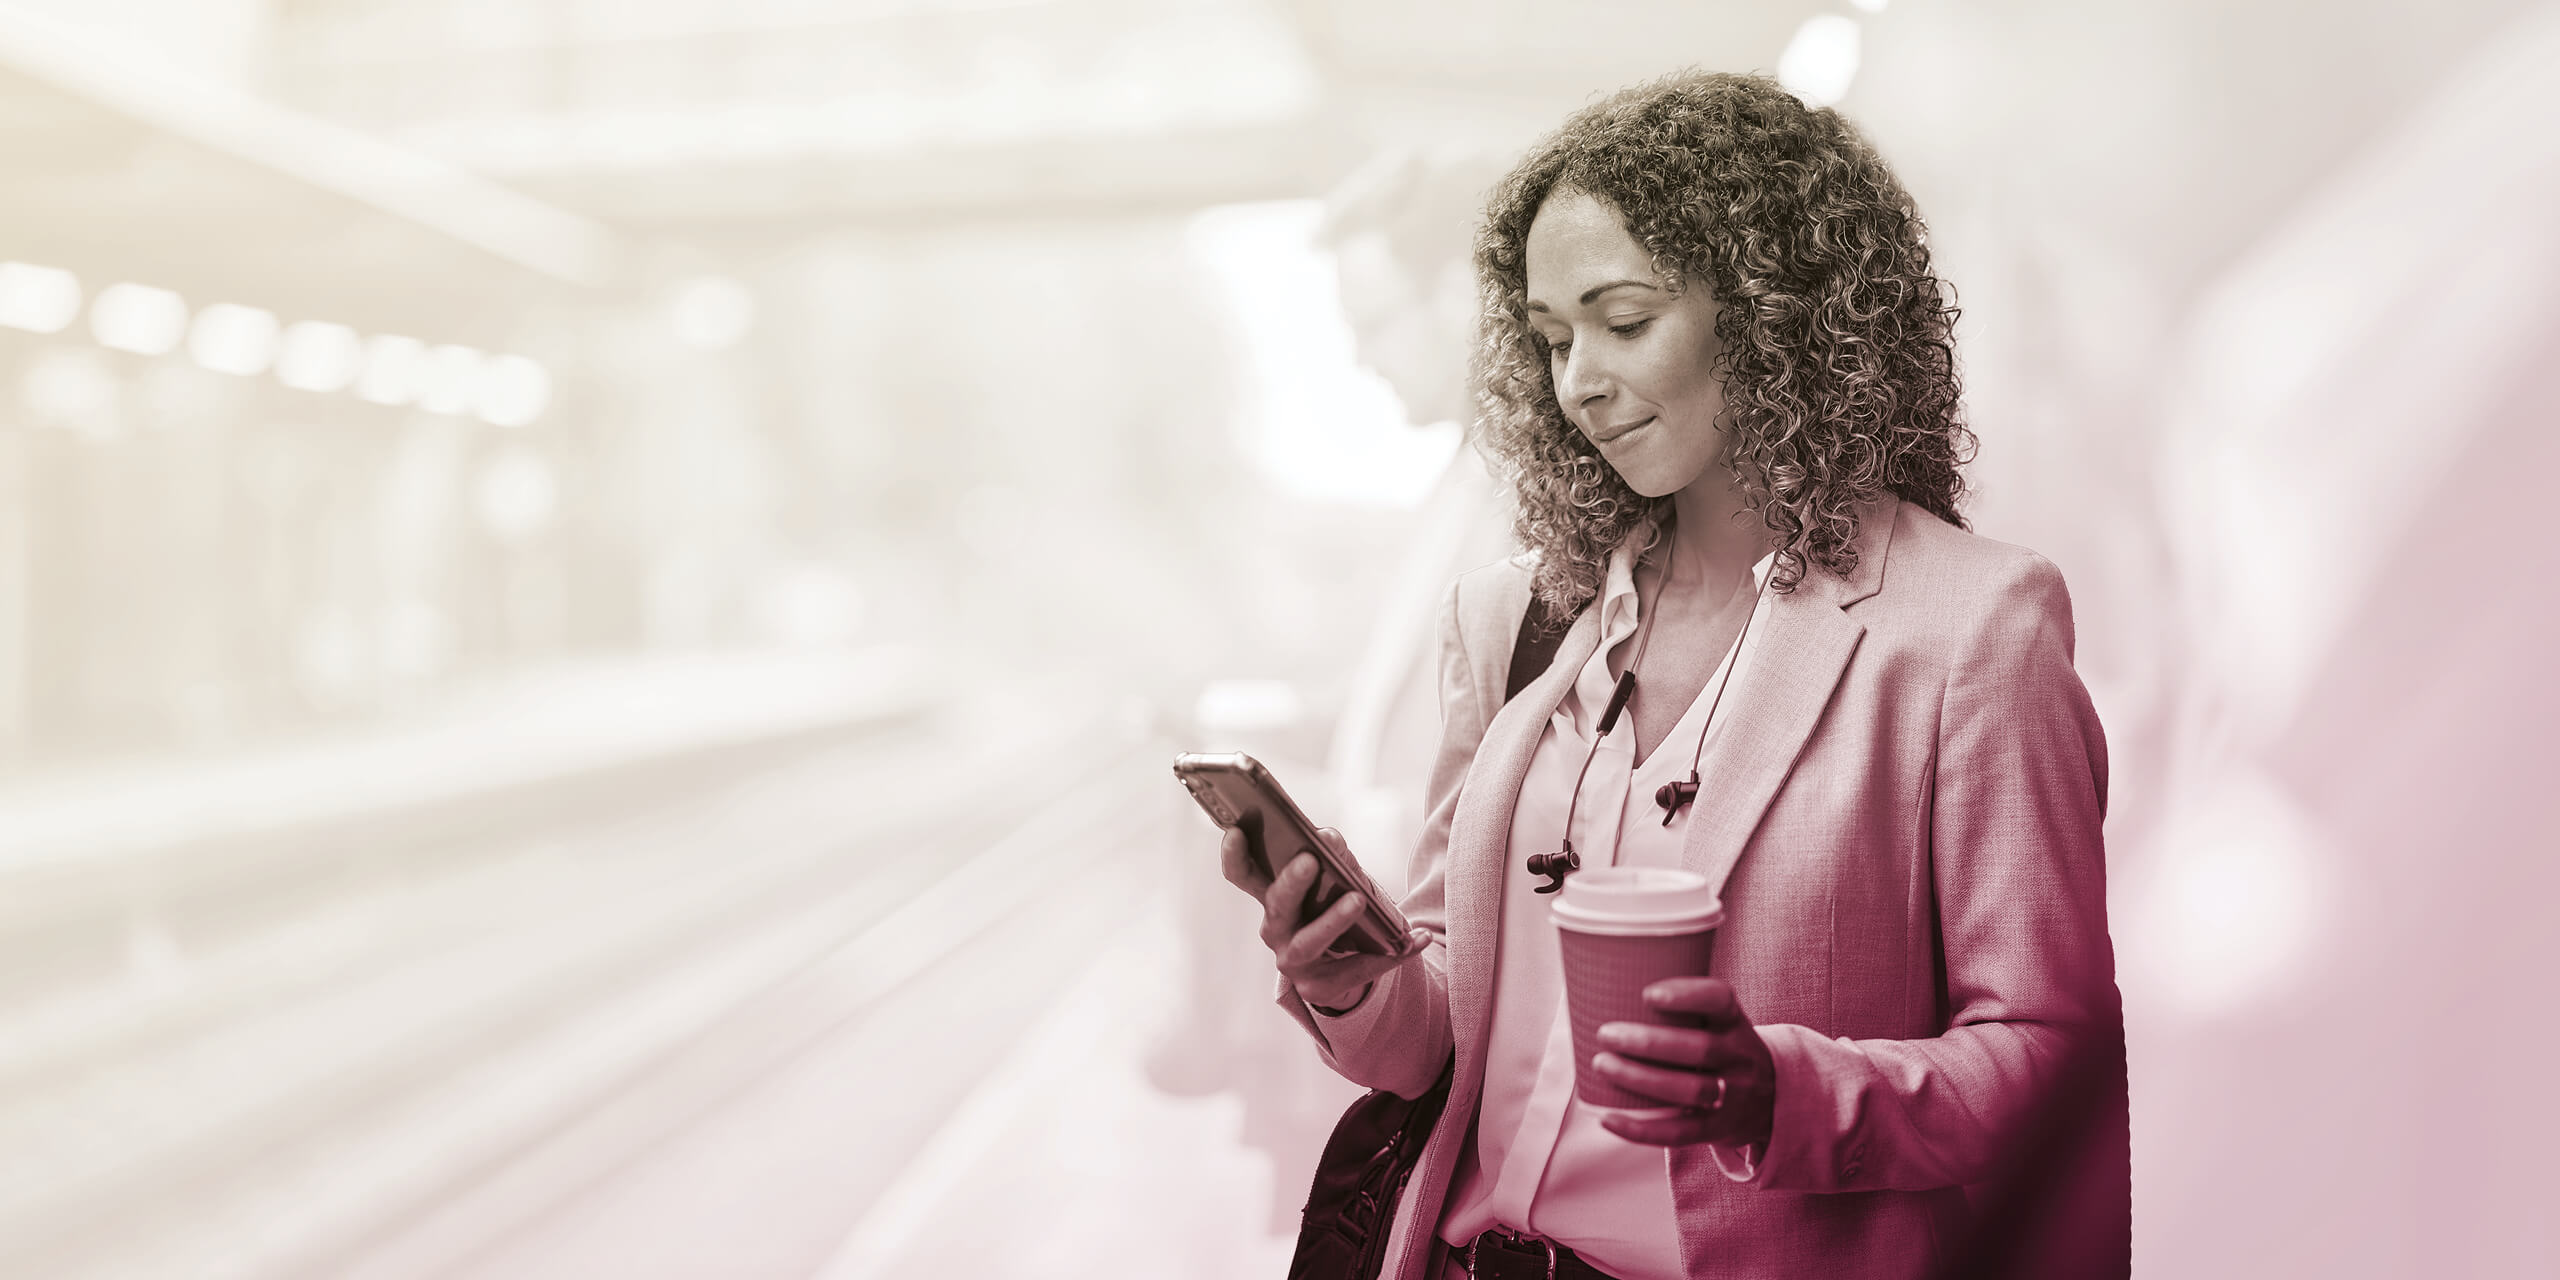 Woman checking phone during morning commute